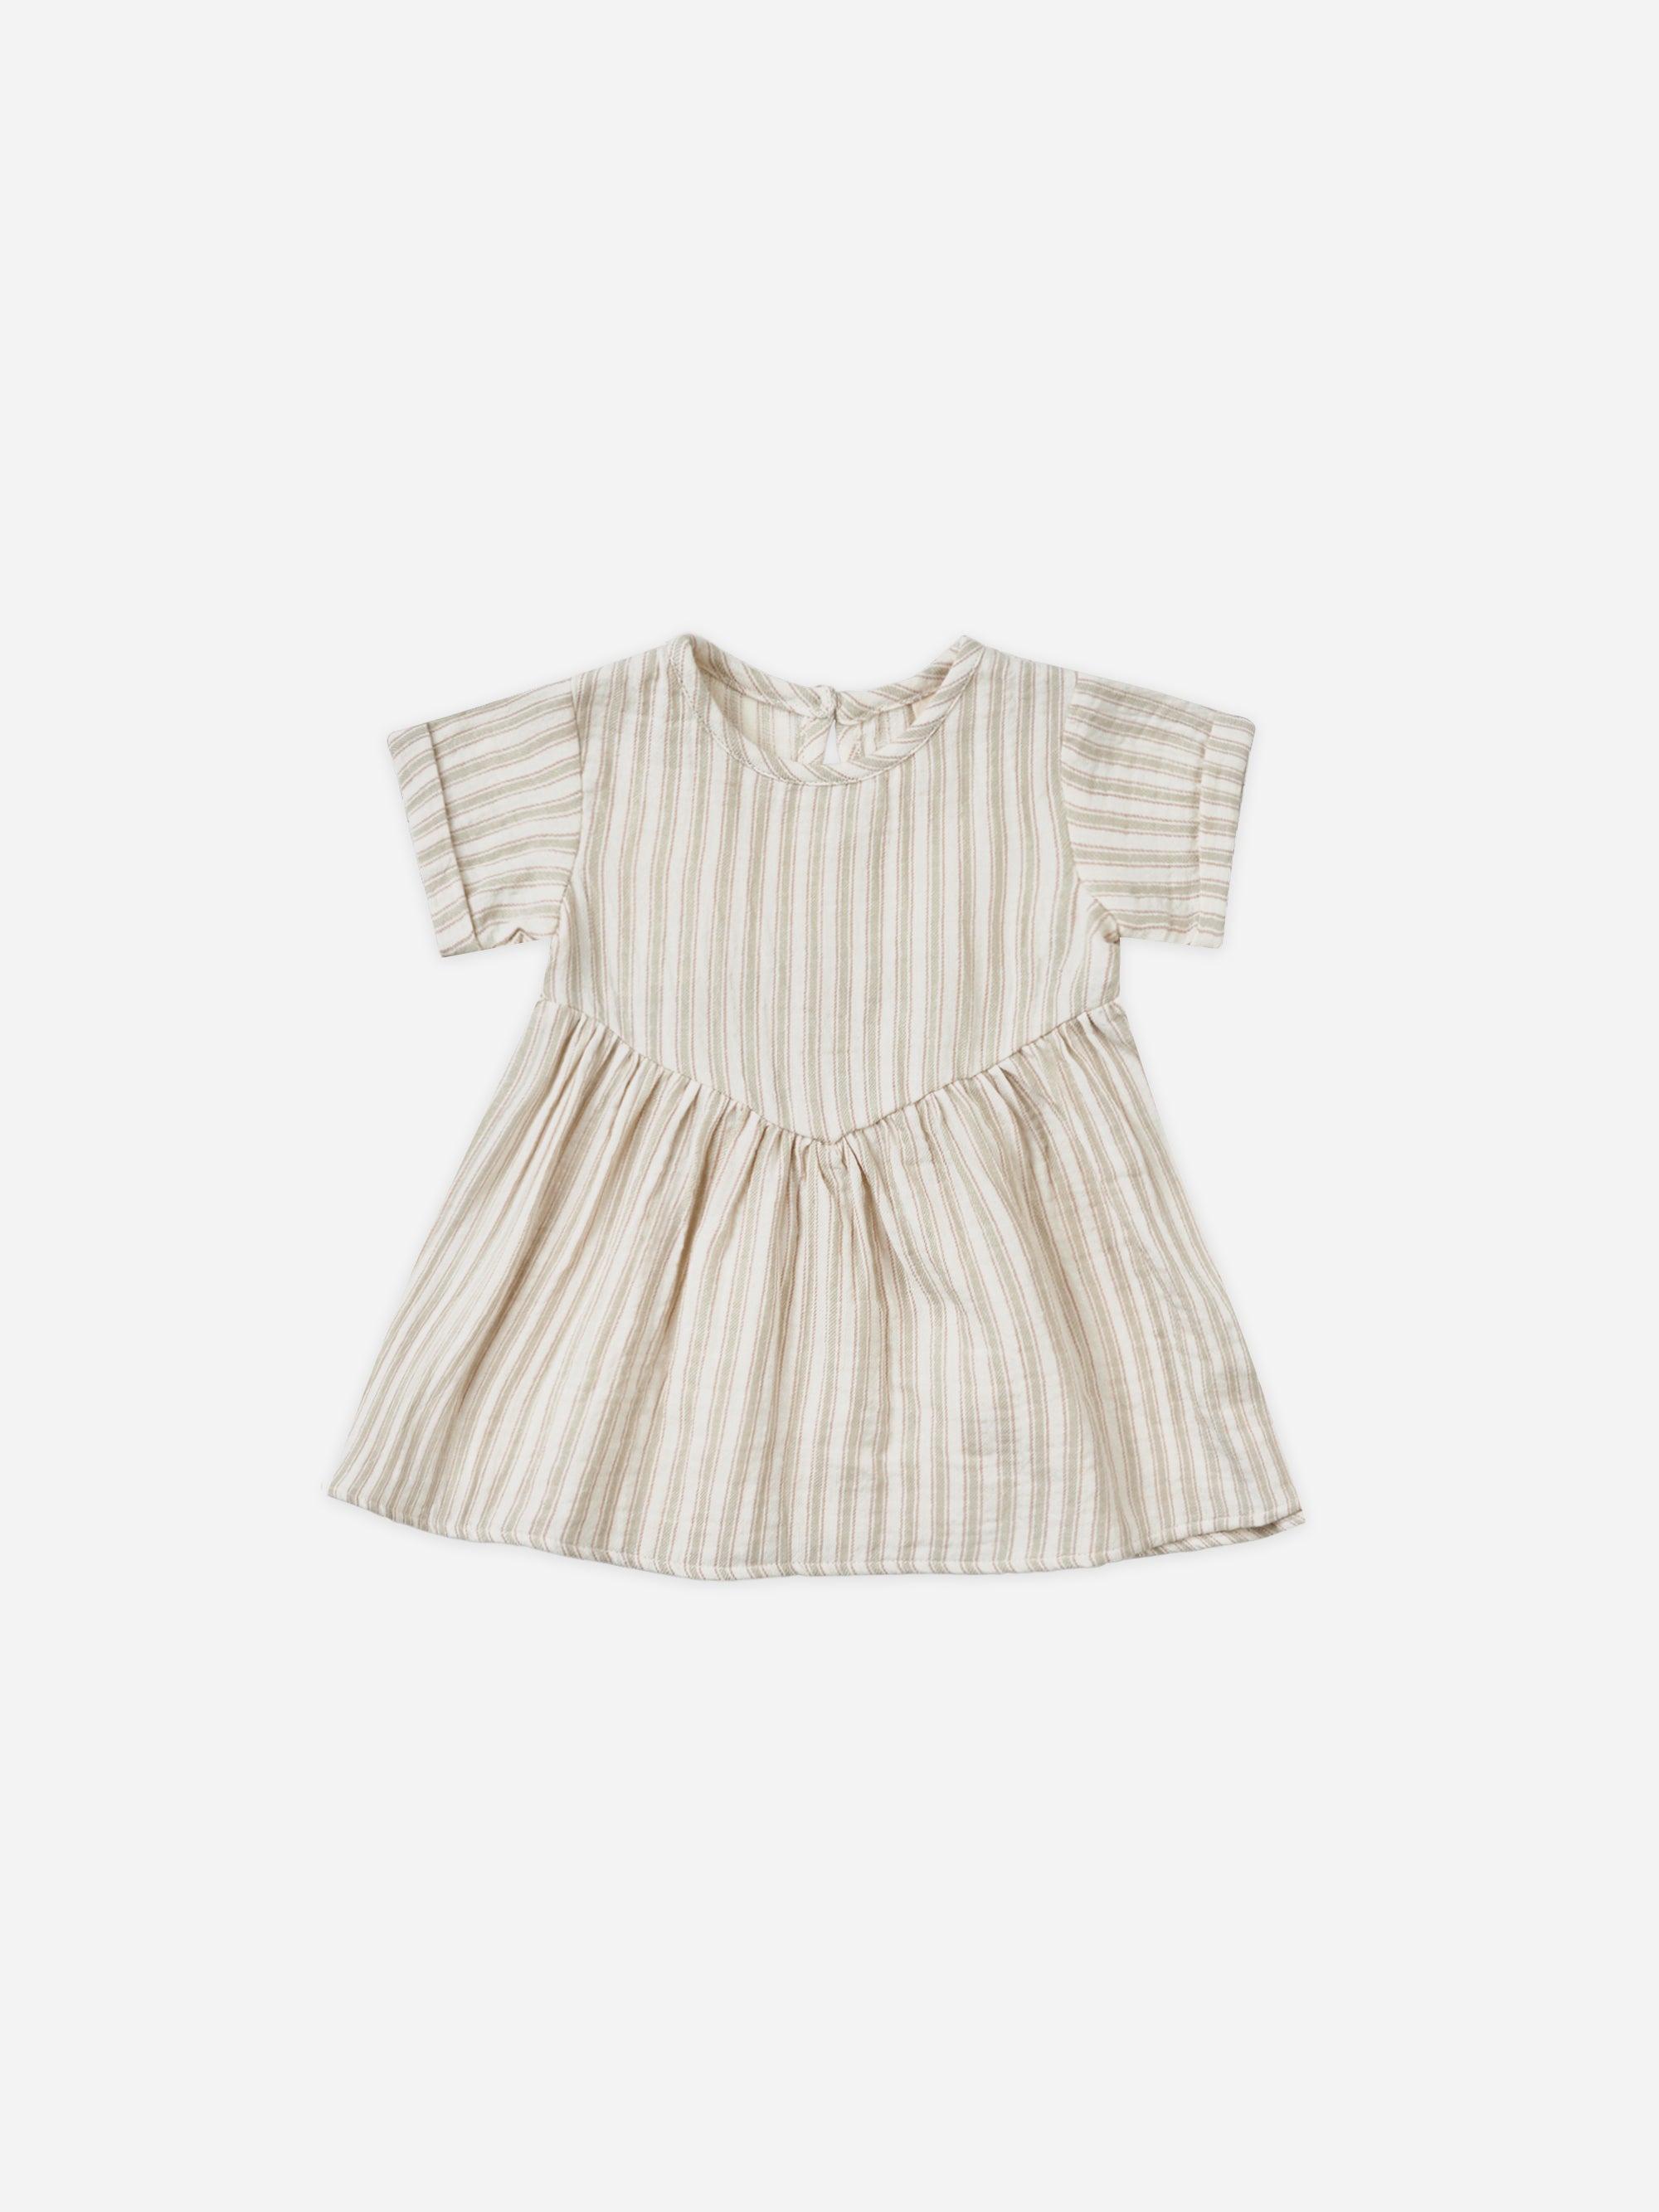 Brielle Dress || Vintage Stripe - Rylee + Cru | Kids Clothes | Trendy Baby Clothes | Modern Infant Outfits |